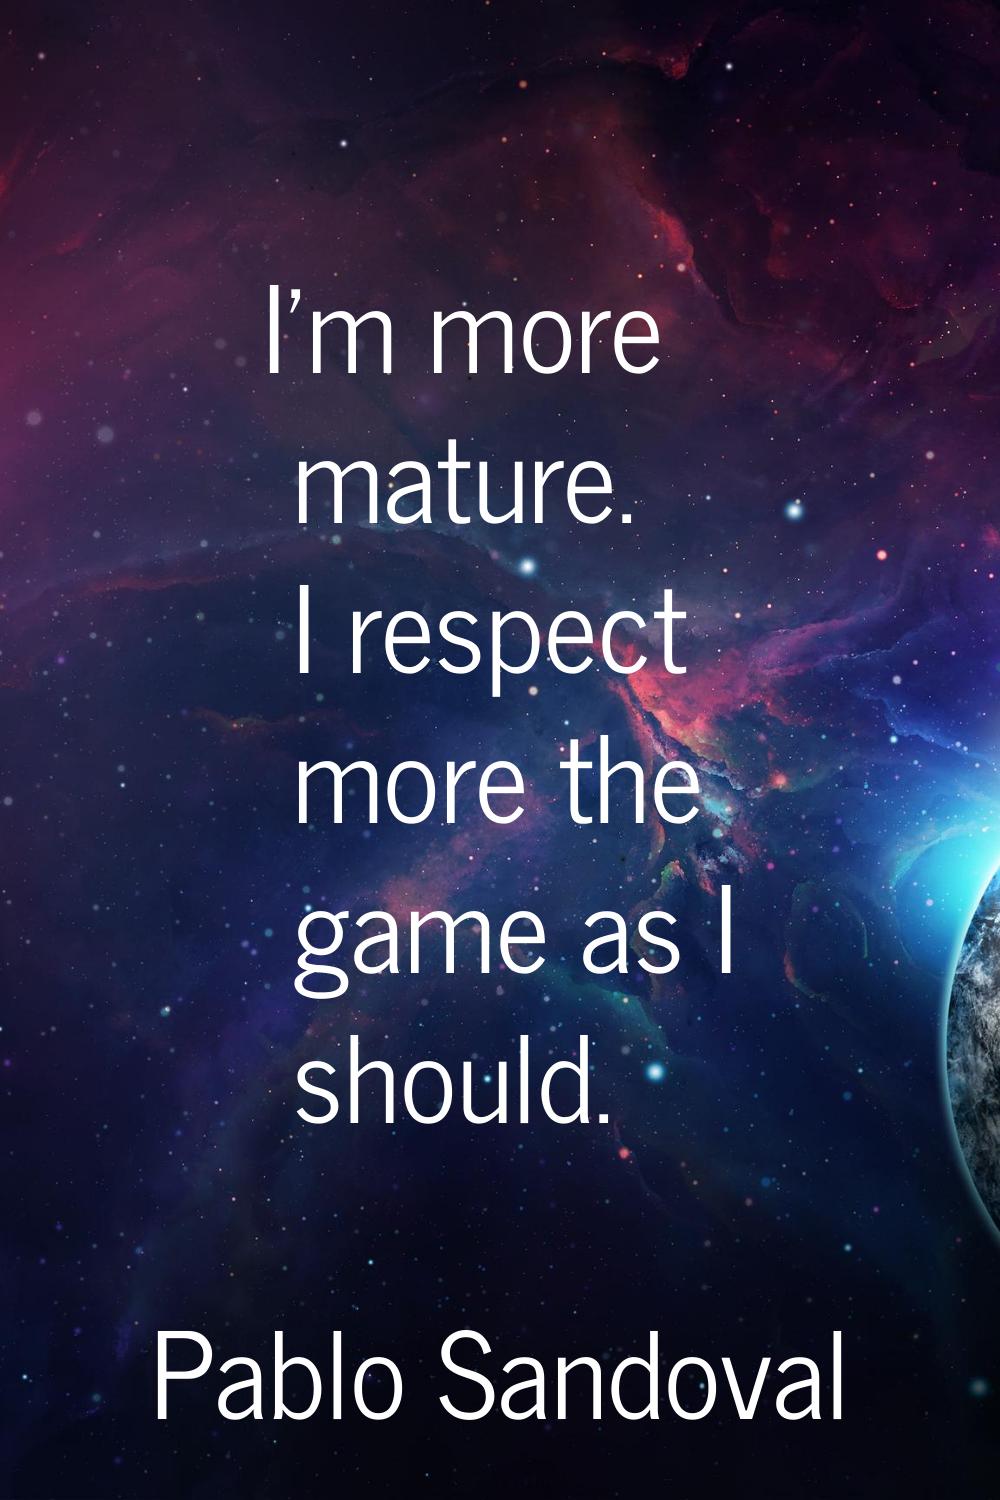 I'm more mature. I respect more the game as I should.